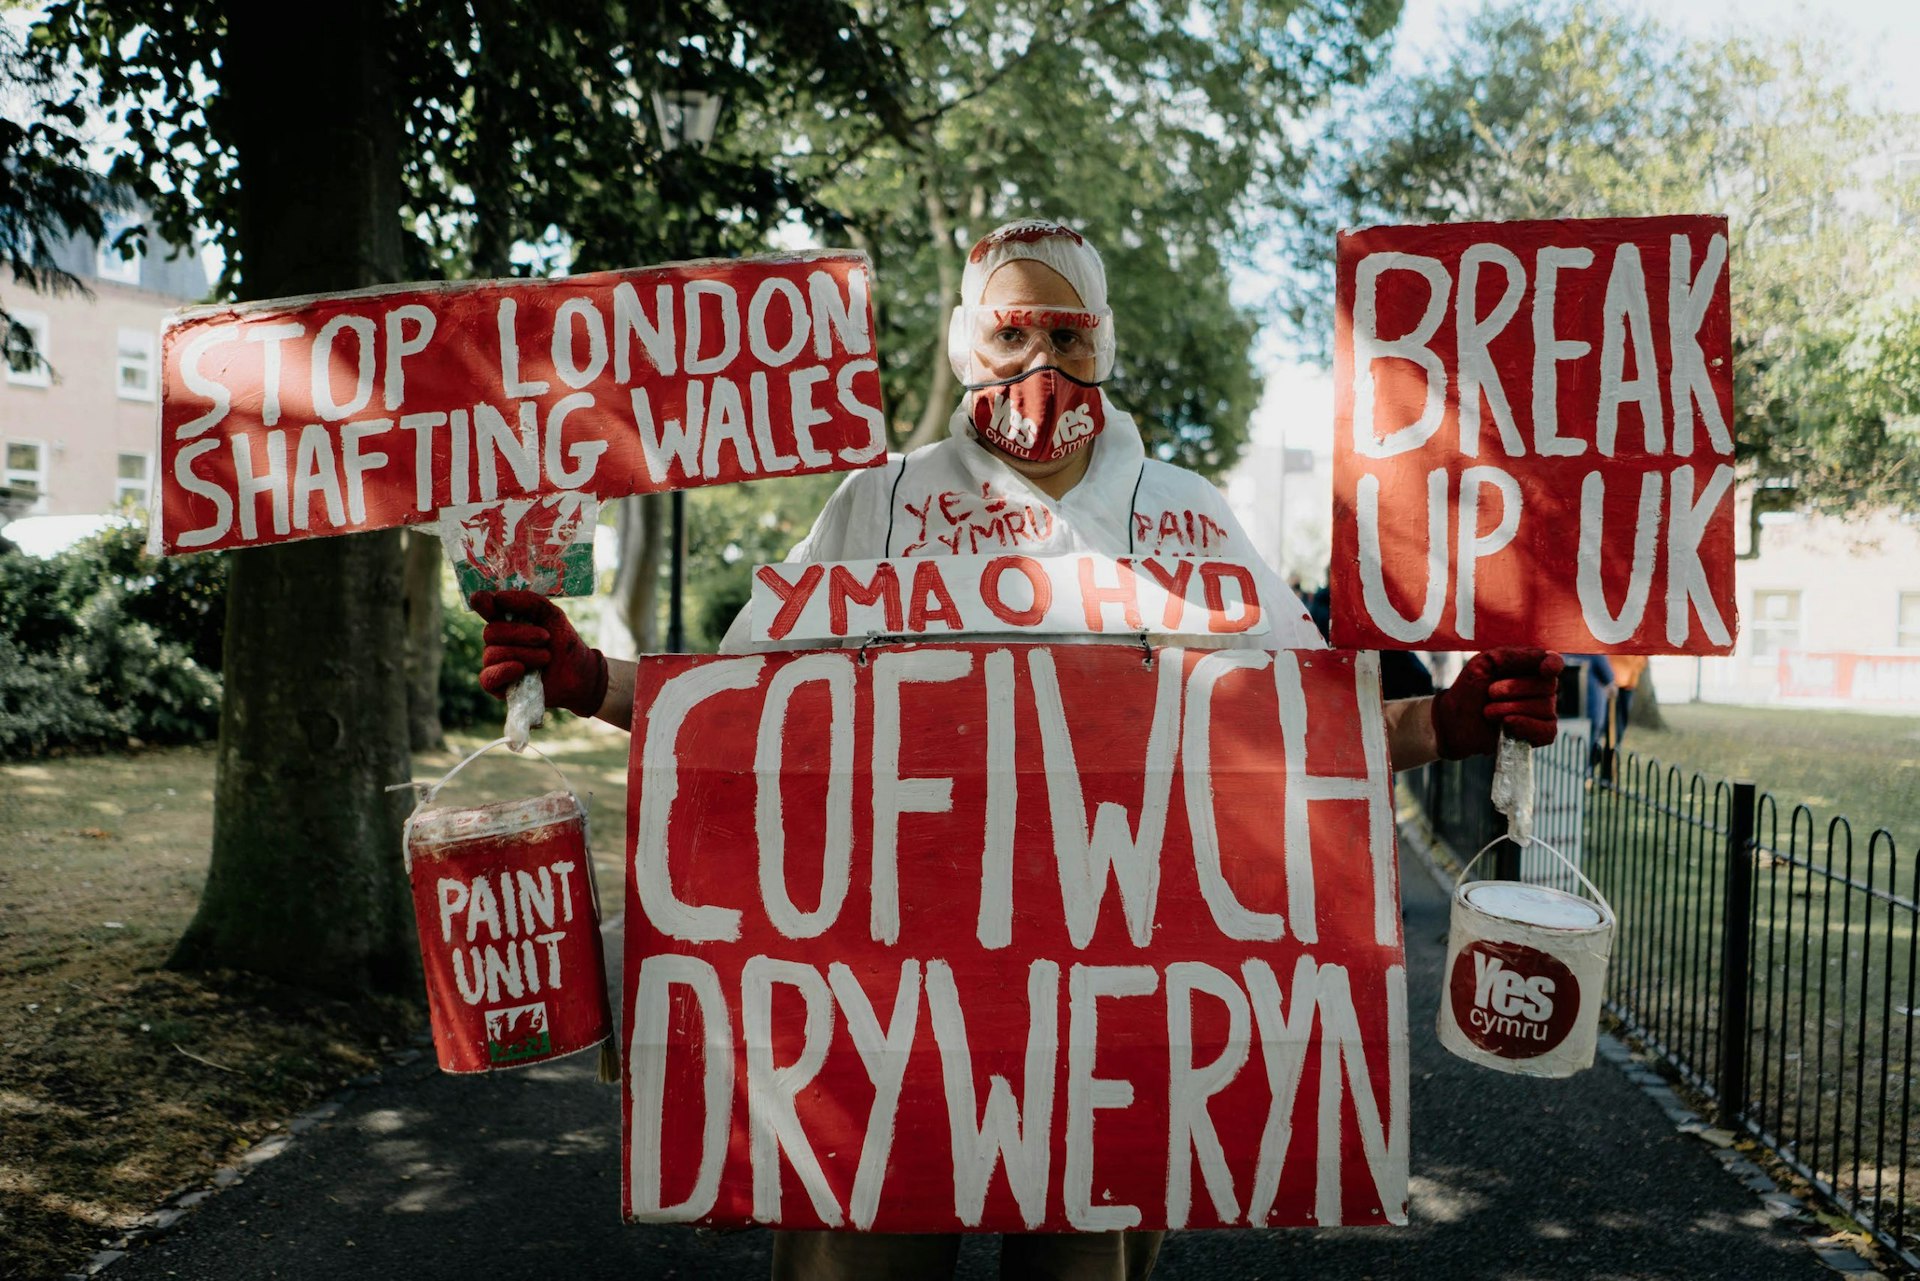 ‘We want a divorce!‘ – photos of the rally for Welsh independence